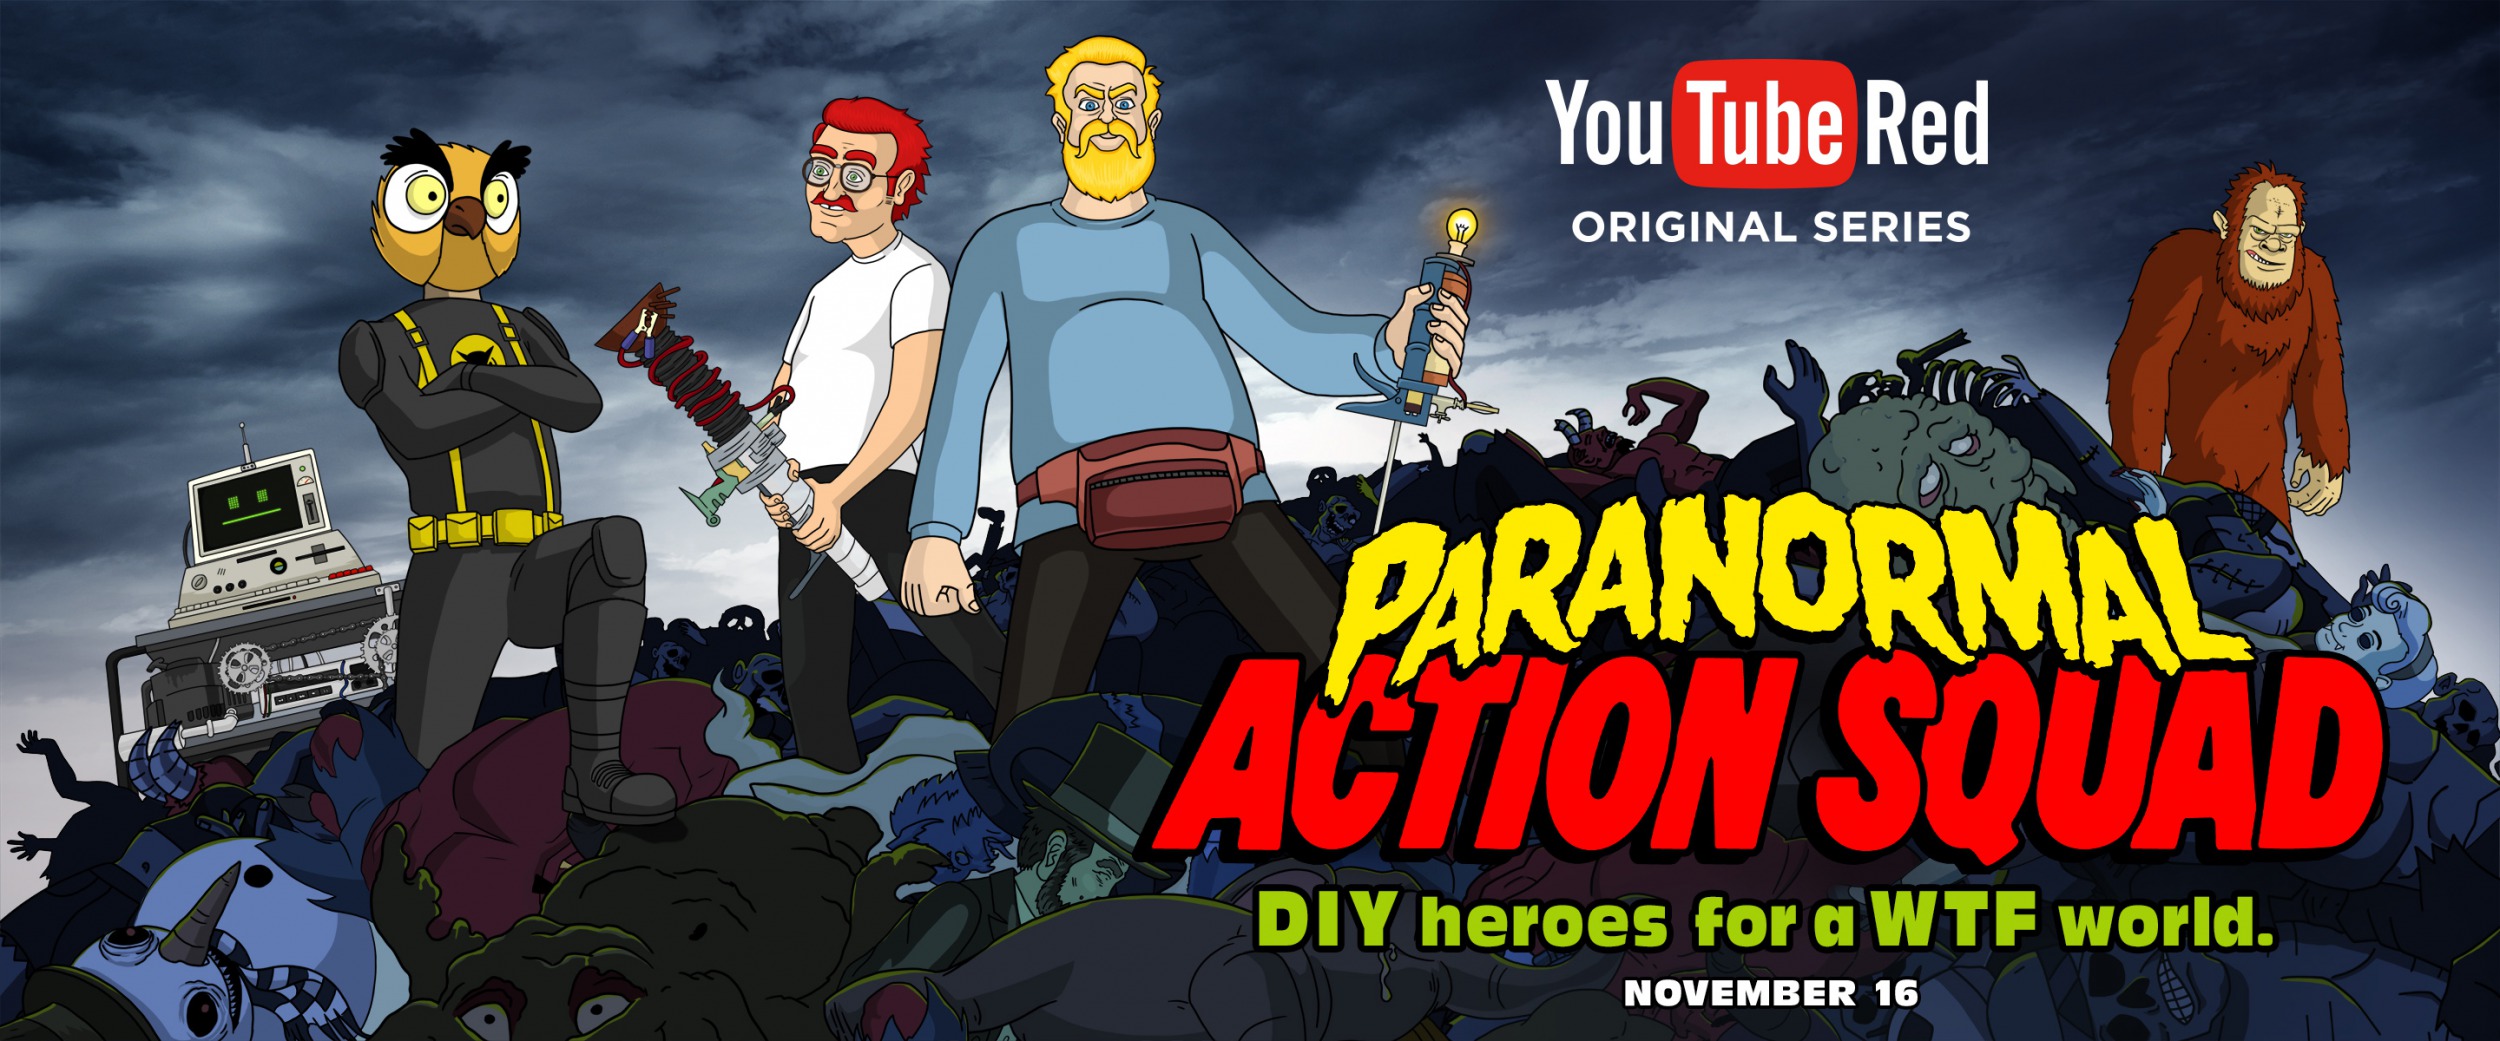 Mega Sized TV Poster Image for Paranormal Action Squad (#2 of 11)